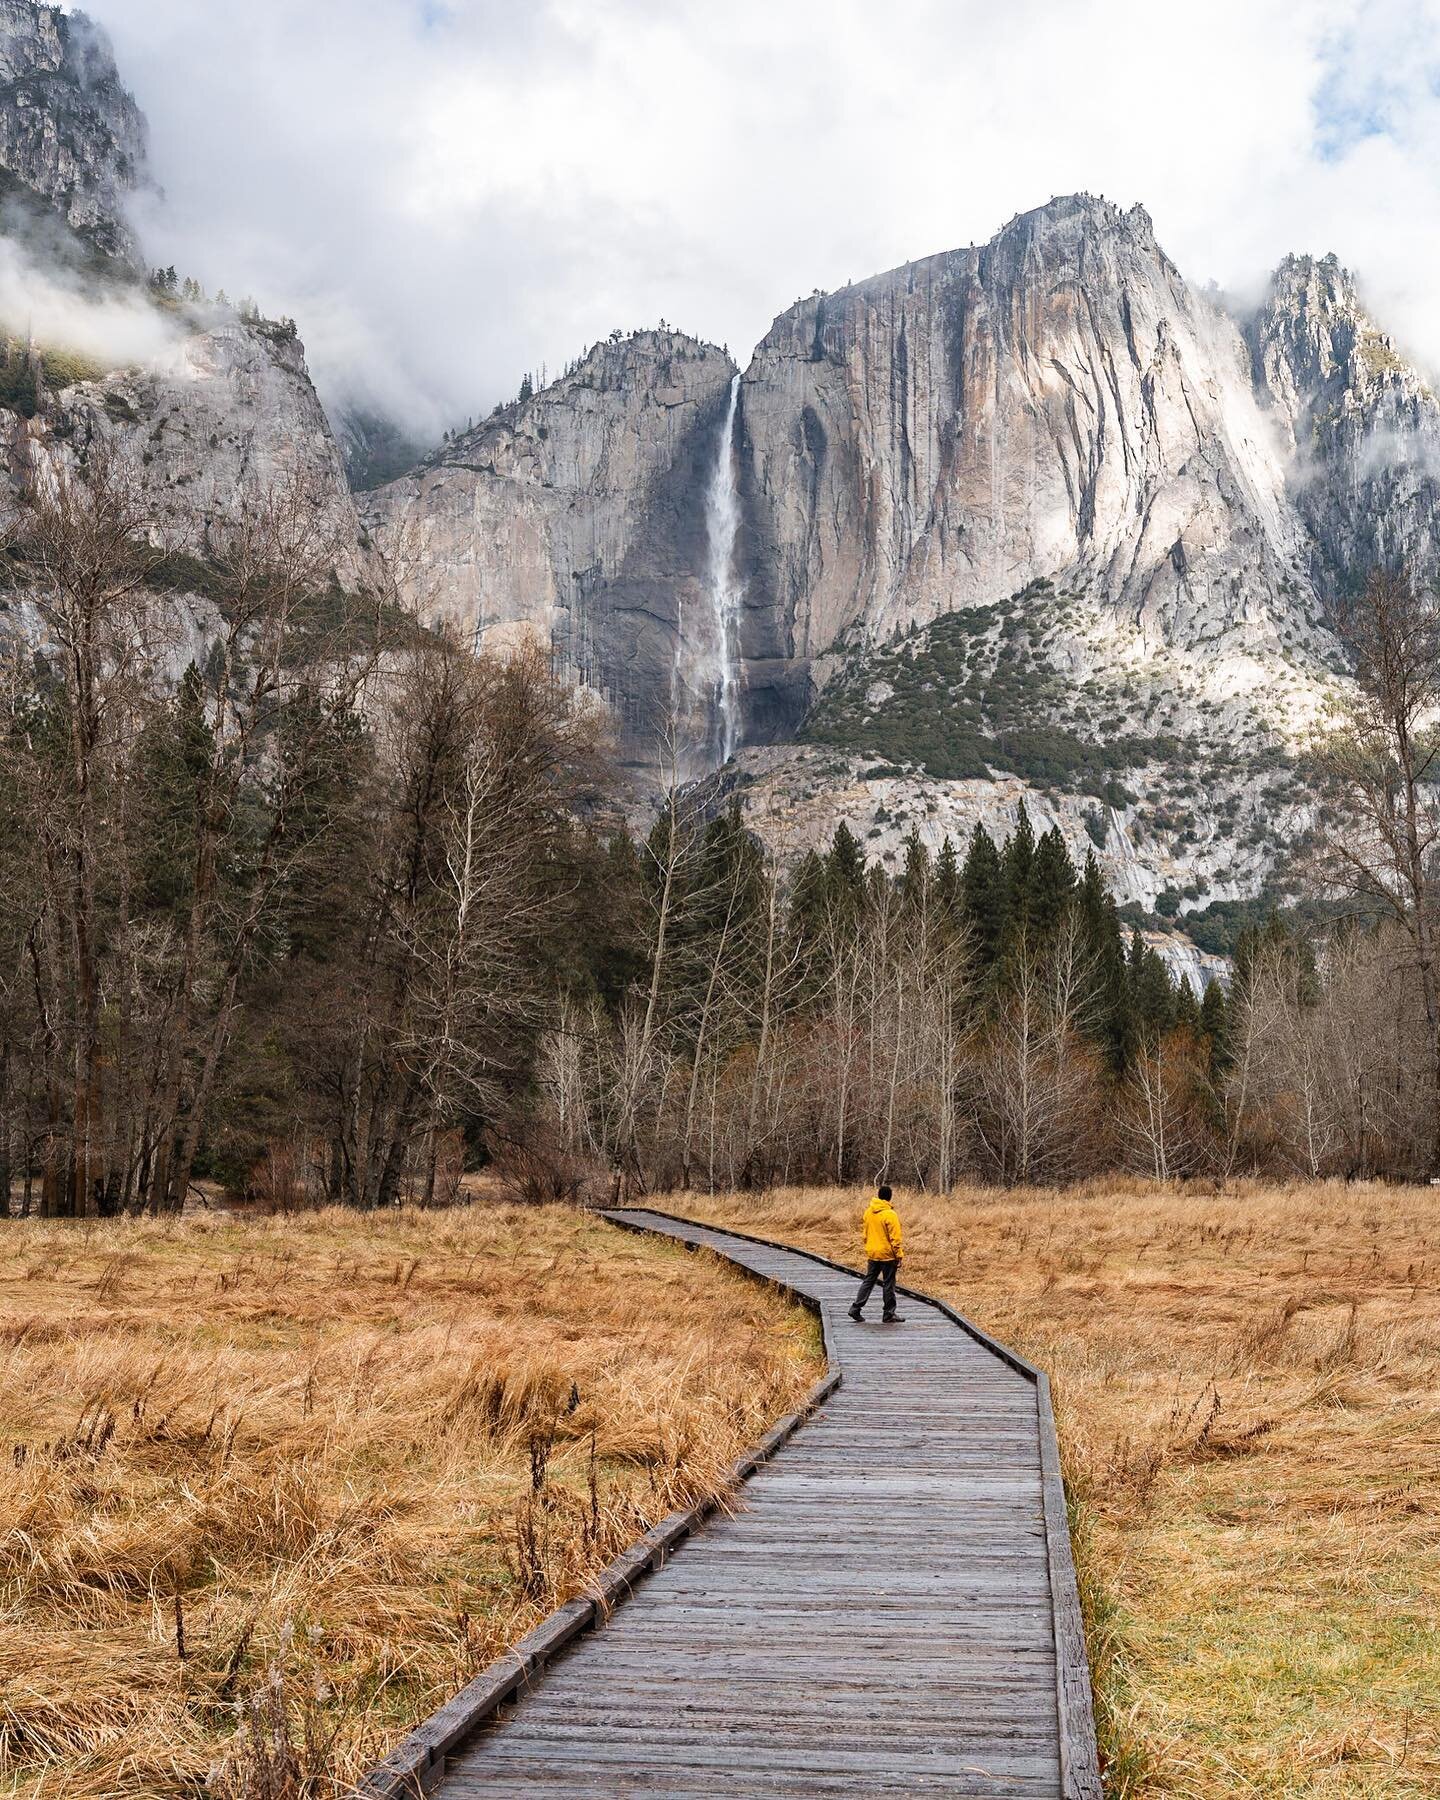 Have you heard? Yosemite is ending the day-use reservation system starting Nov 1st. Which means you can visit anytime you want without applying for that special permit. Selfishly I&rsquo;ve loved the feeling of a less crowded park and trails this sea